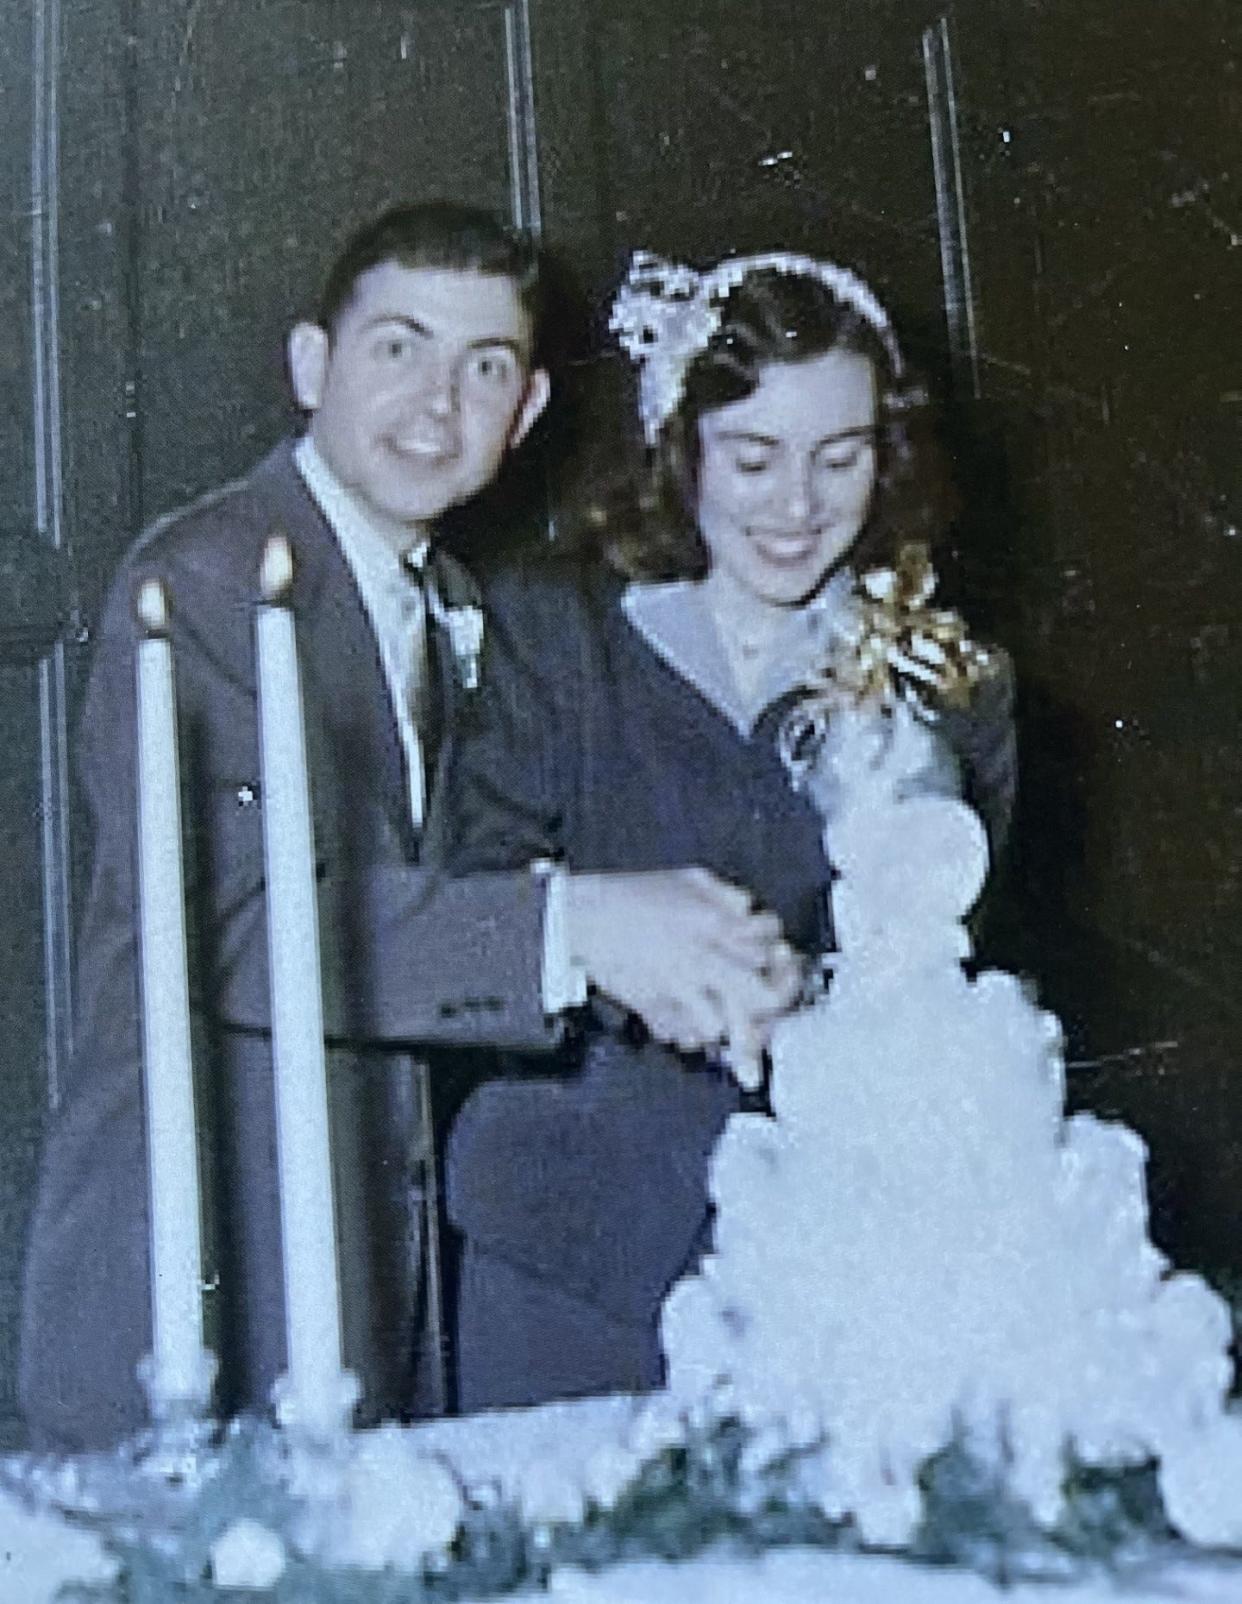 Jack and Beverly Irvine at their wedding on Feb. 7,1953.